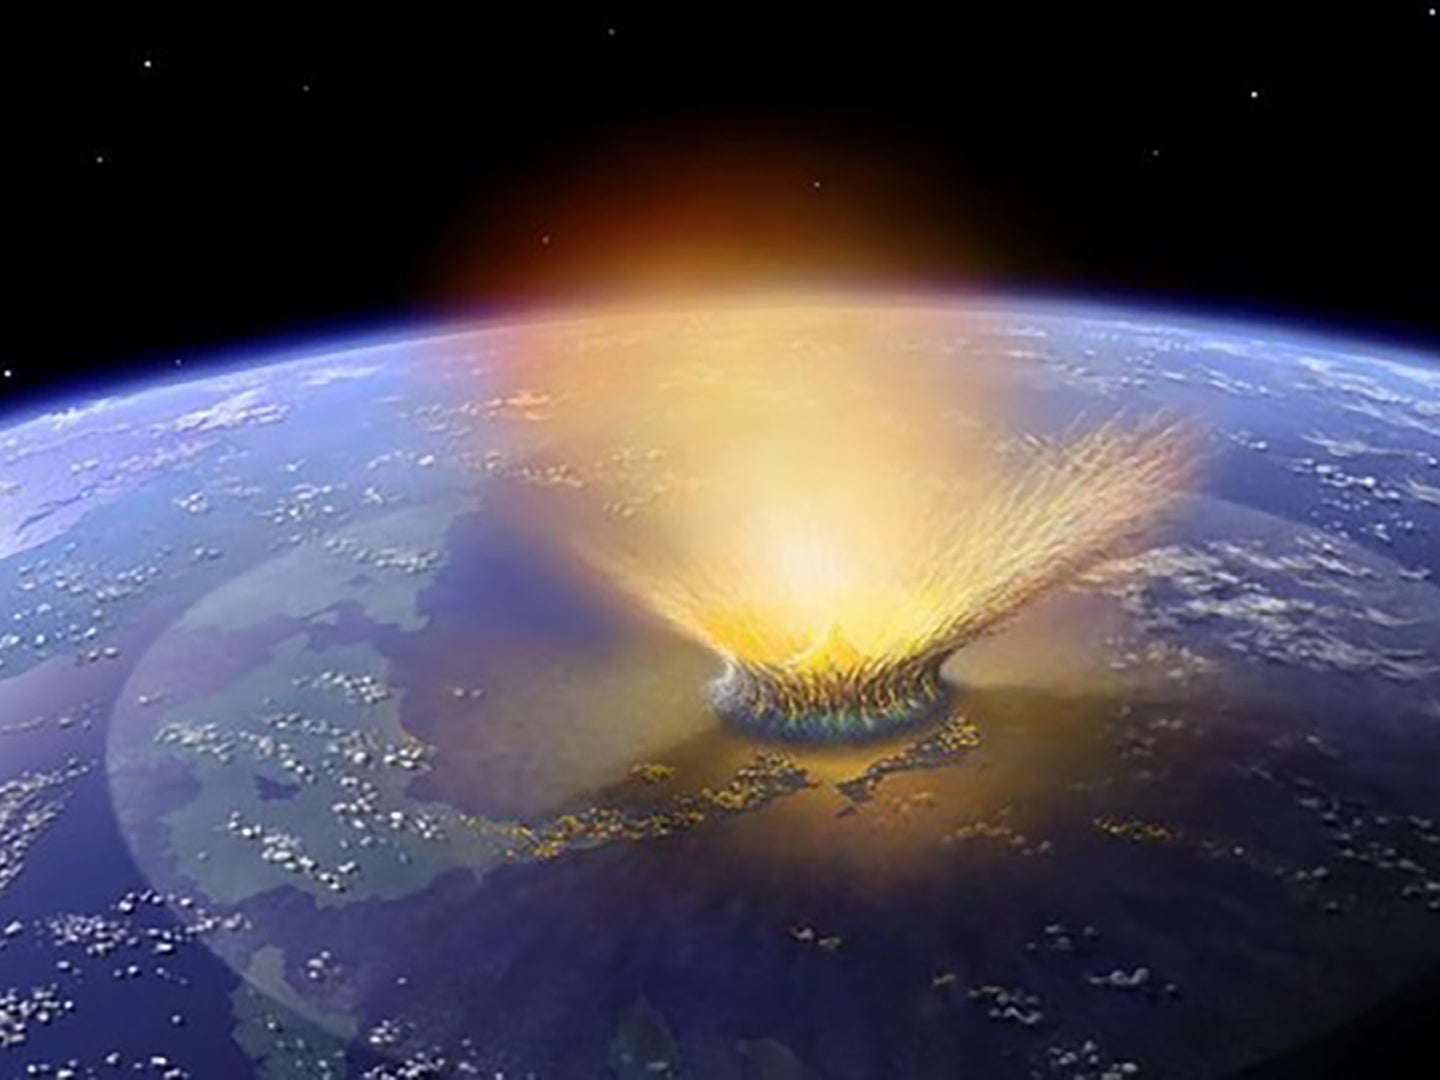 A large asteroid (~12 km in diameter) hit Earth 66 million years ago, likely causing the end-Cretaceous mass extinction.